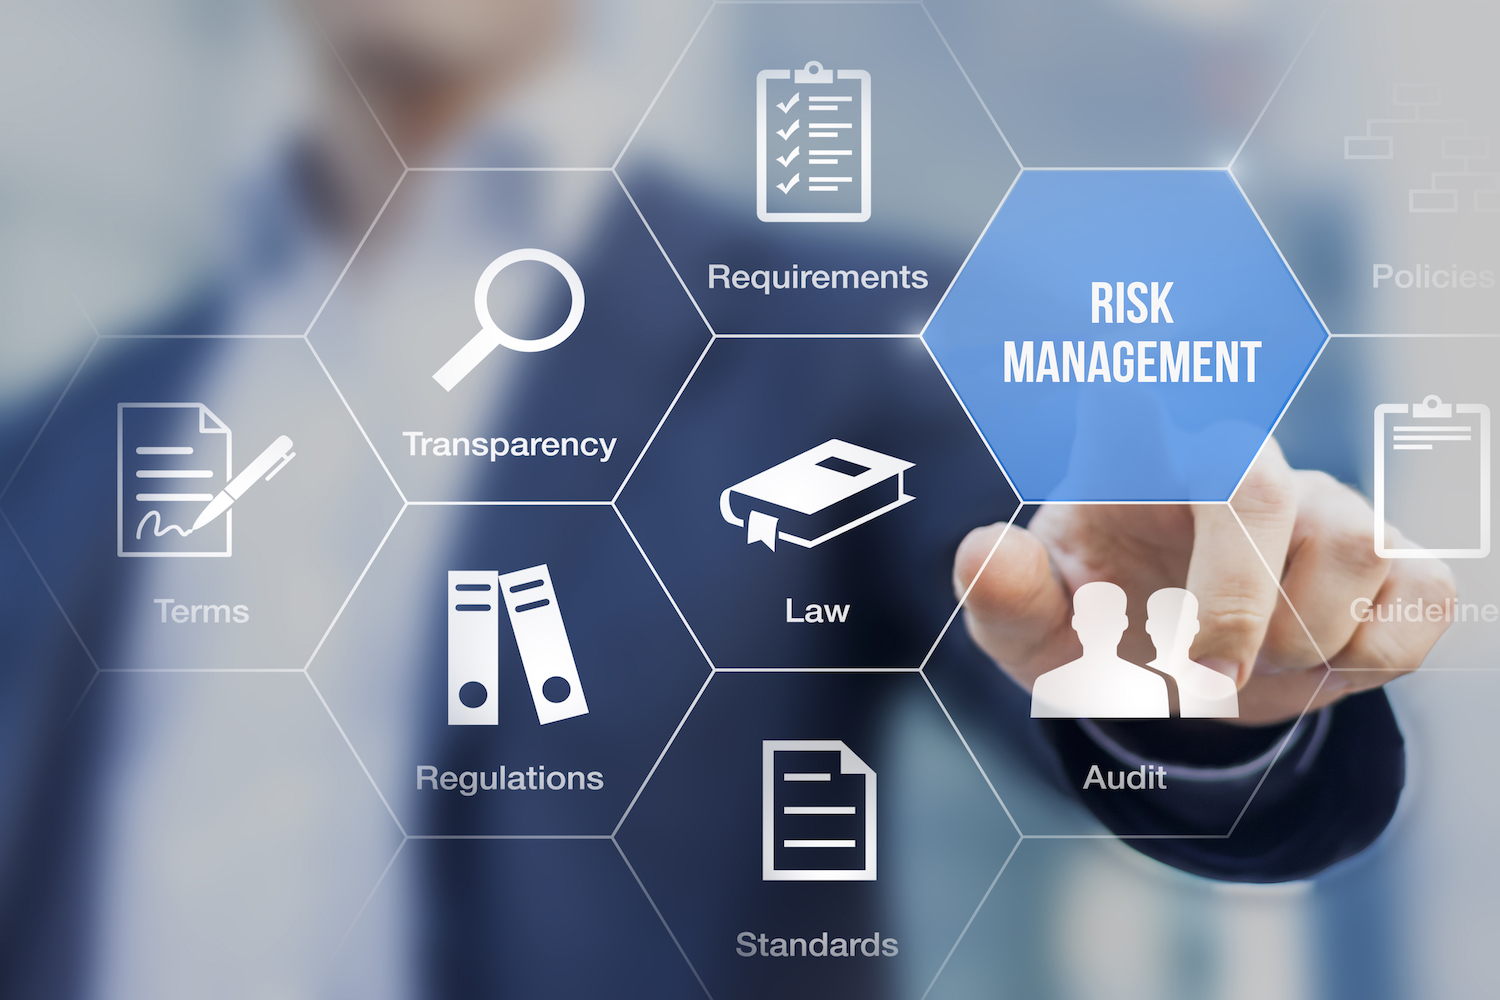 compliance and risk management web image